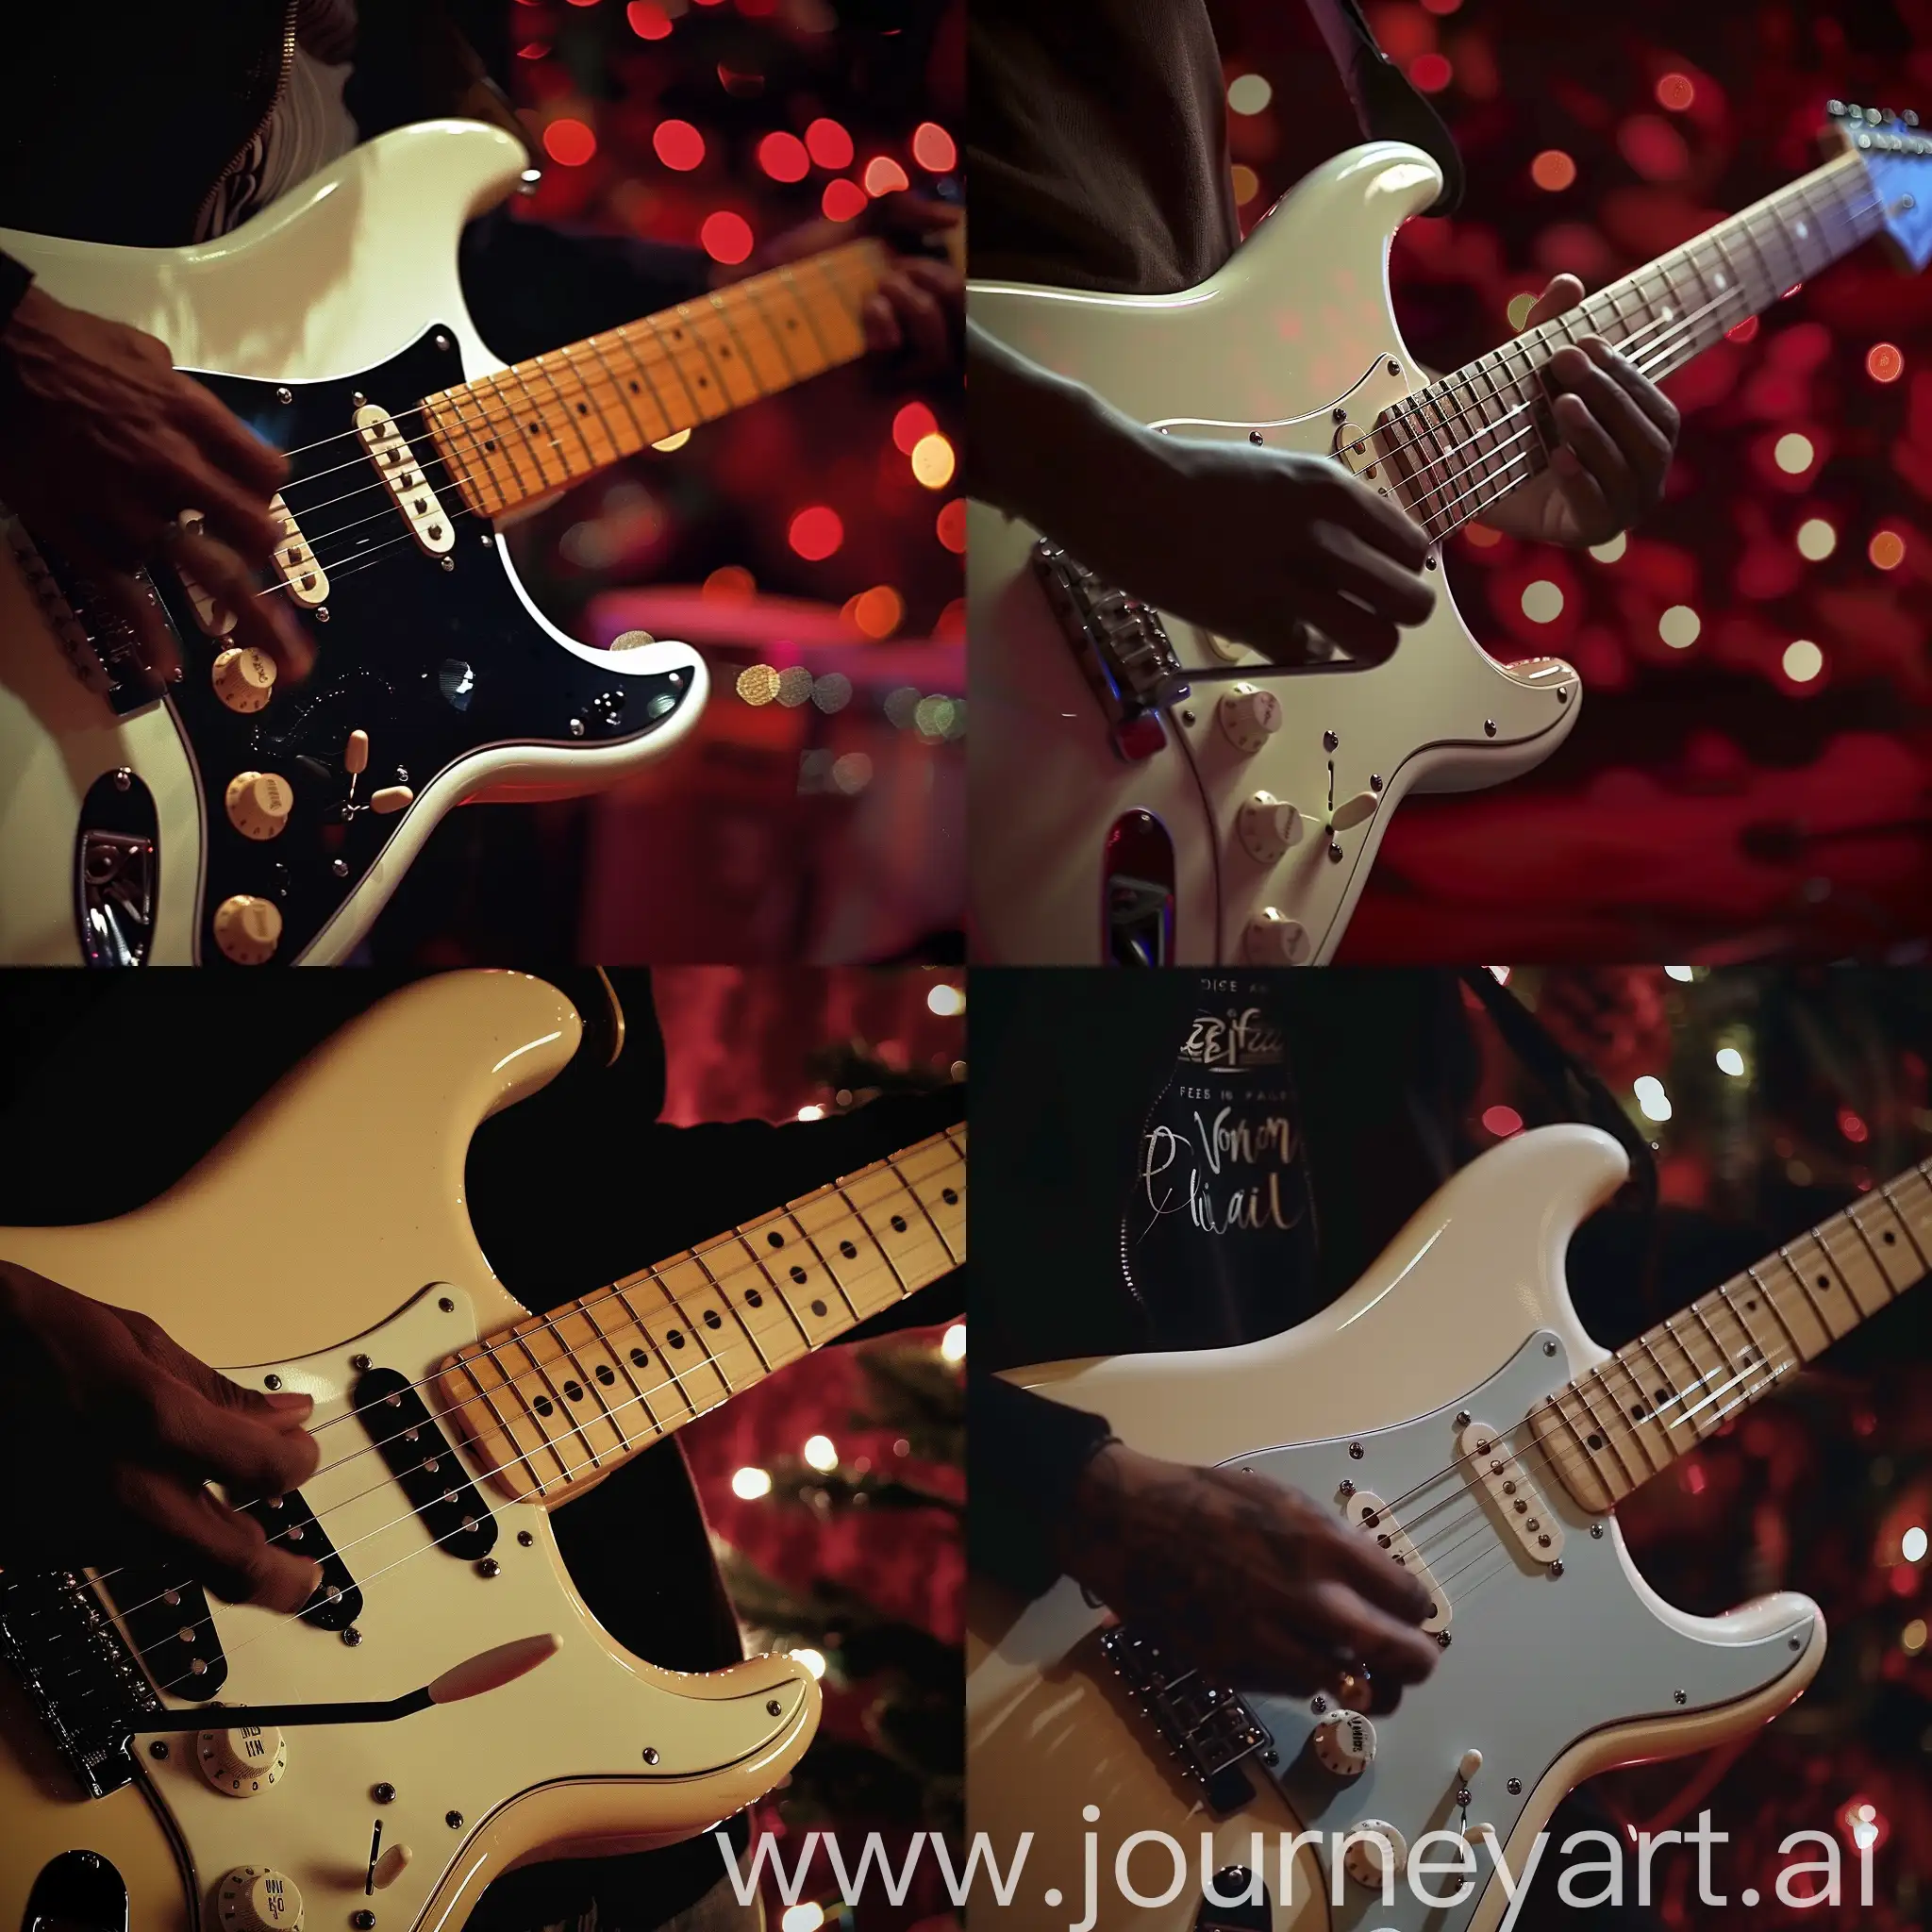 Electric-Guitar-Performance-Black-Hand-Playing-White-Fender-Guitar-in-Romantic-RedLit-Storefront